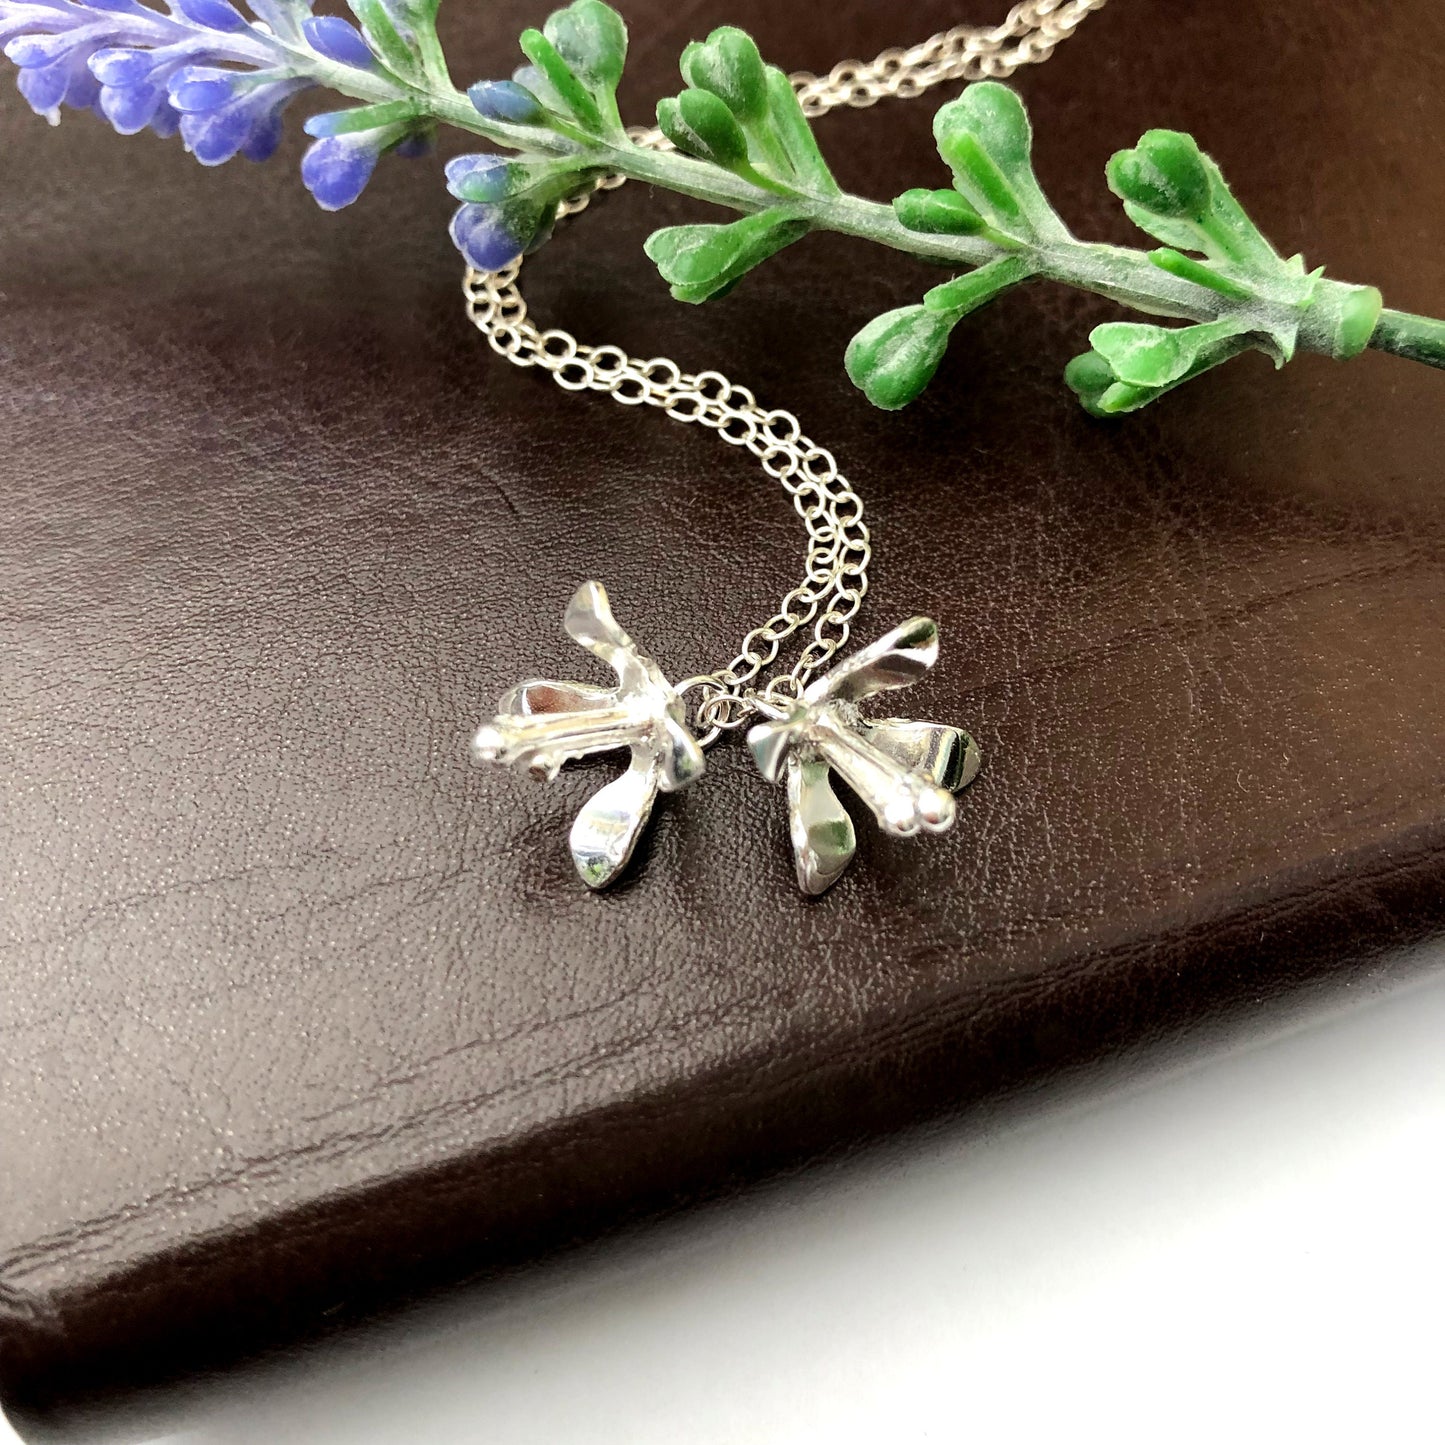 Double Lily Charm Necklace, Sterling Silver Flower Drop Pendant